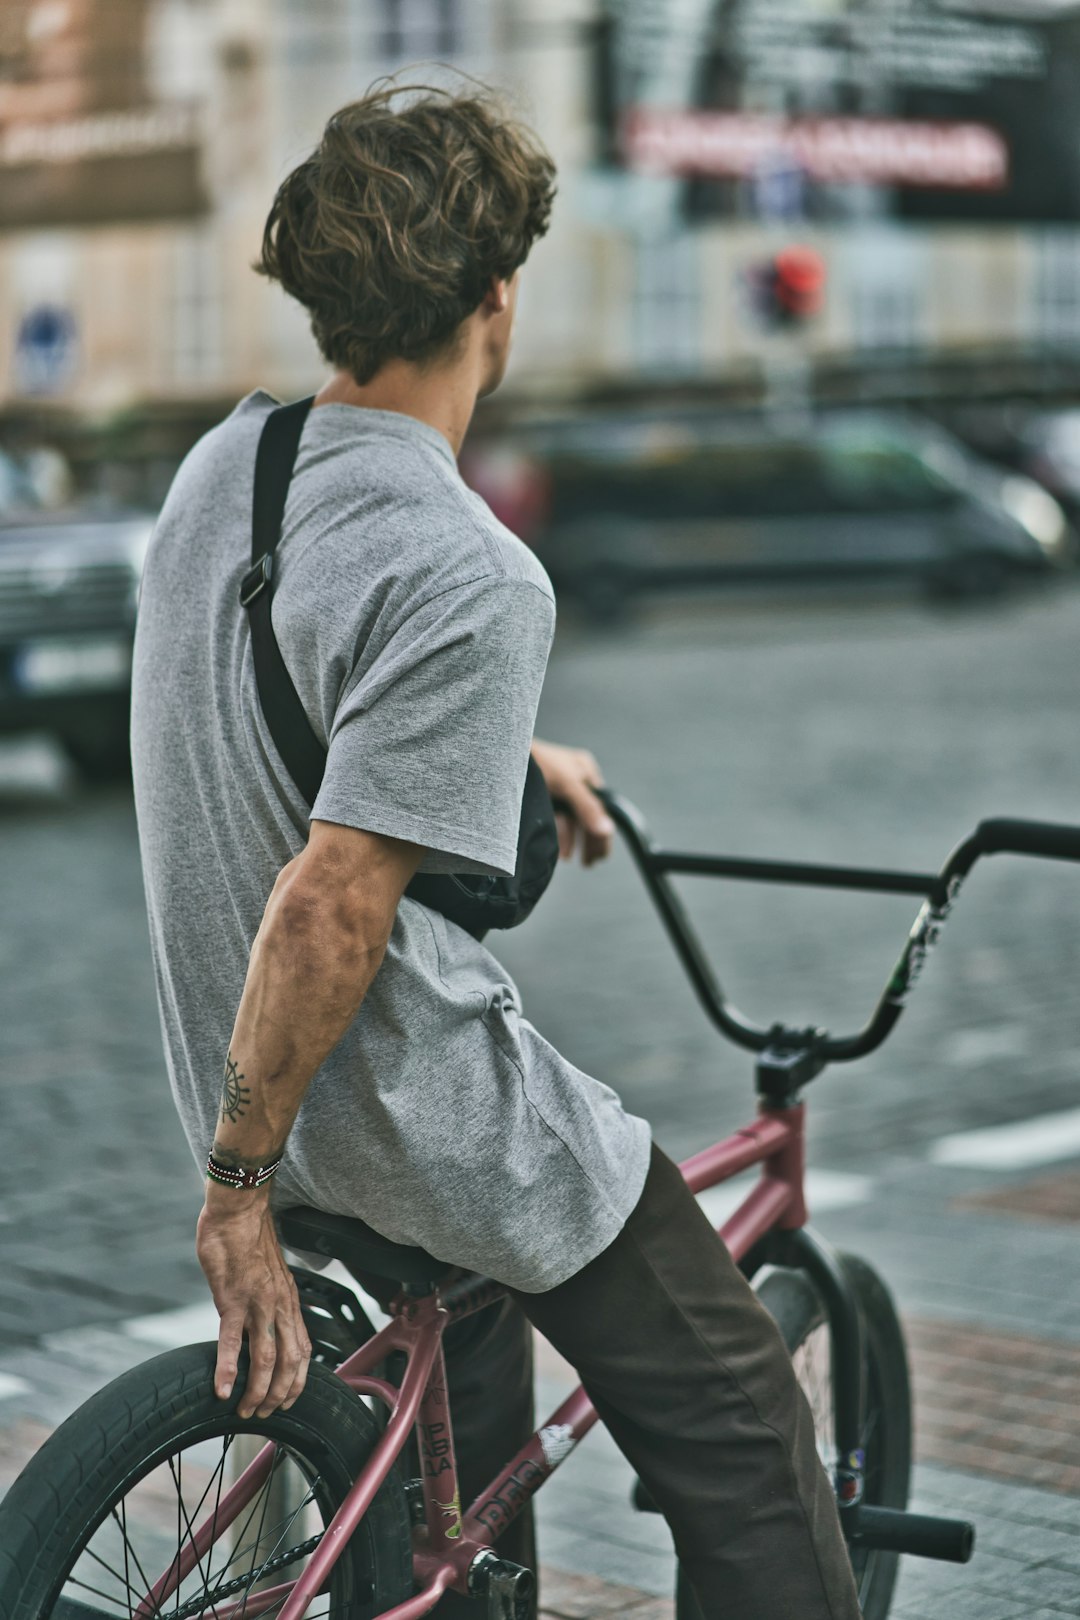 man in gray t-shirt and gray shorts sitting on red bicycle during daytime